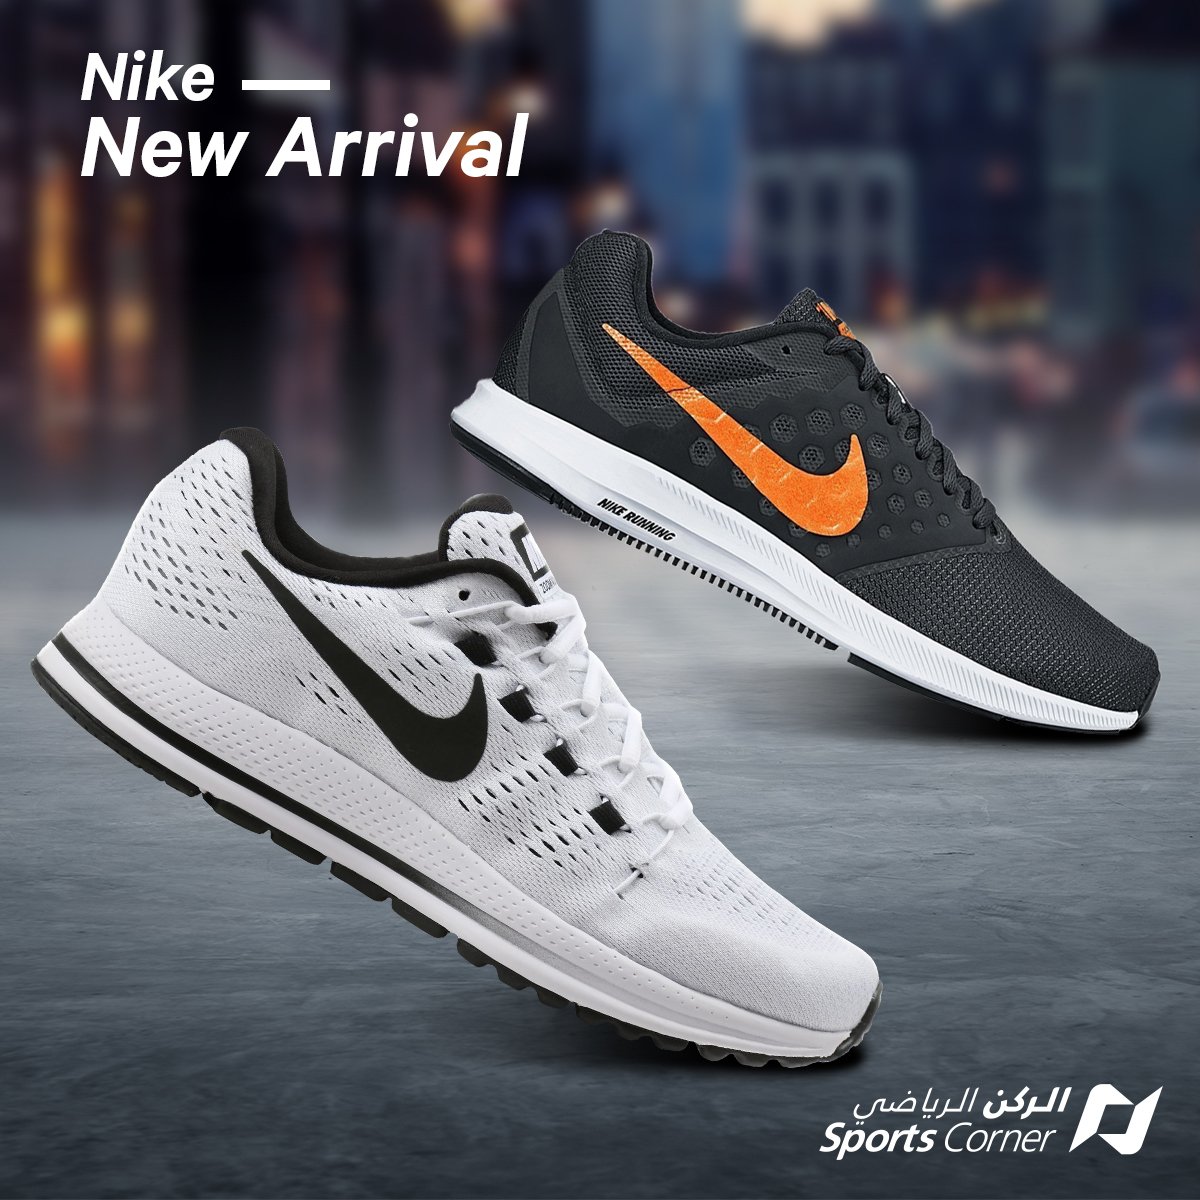 igual vaquero Médula Sports Corner on Twitter: "Feel free &amp; comfy in every move you make  with the latest new arrivals from #Nike https://t.co/Q7hBpQuT2I" / Twitter